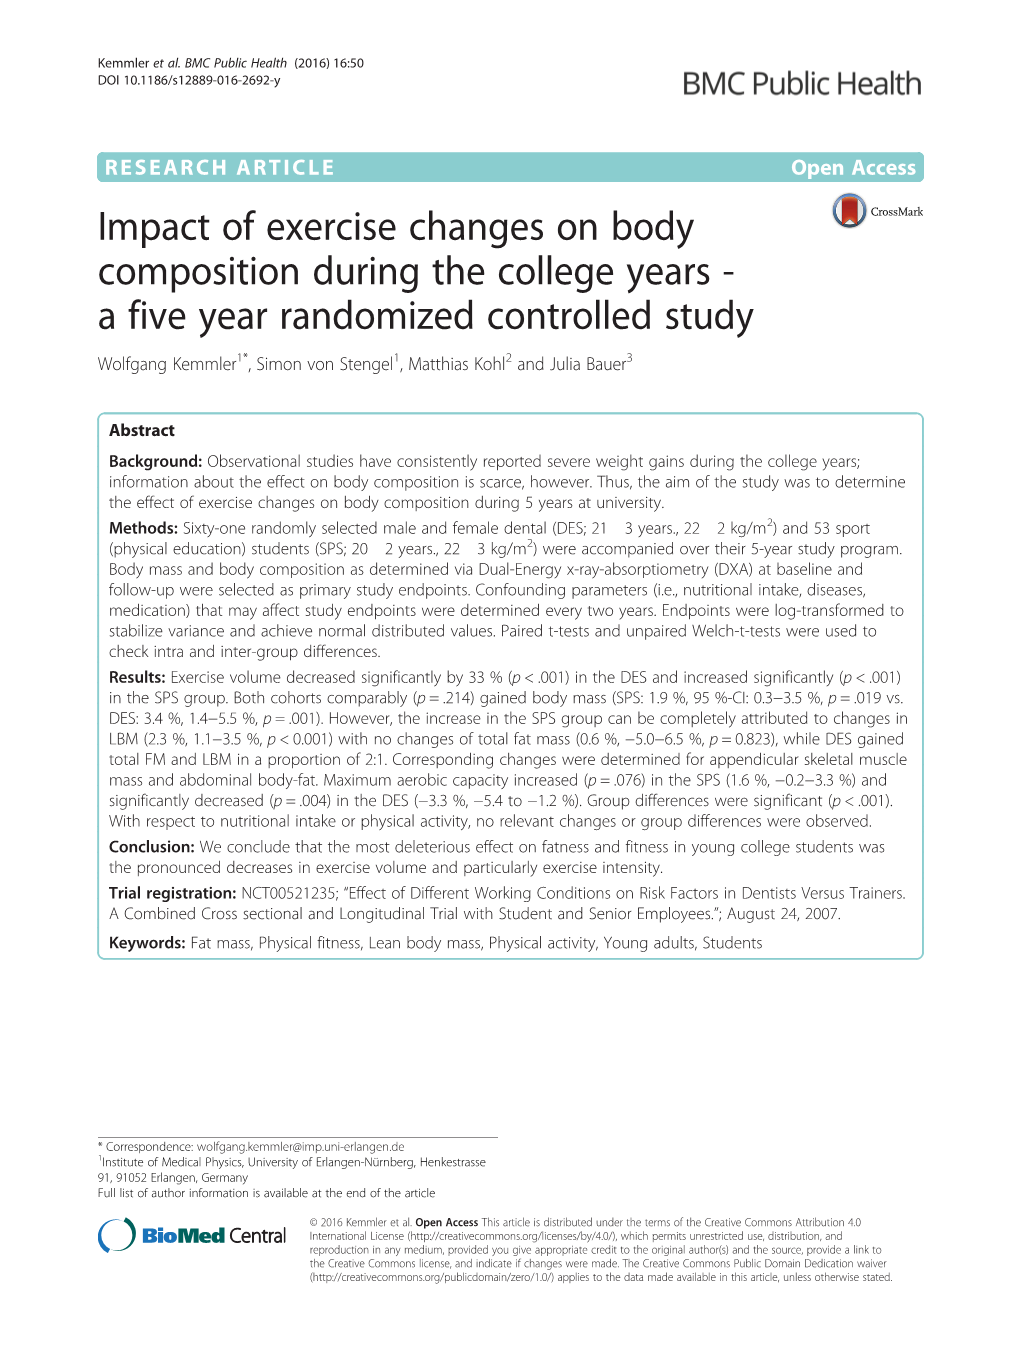 Impact of Exercise Changes on Body Composition During the College Years